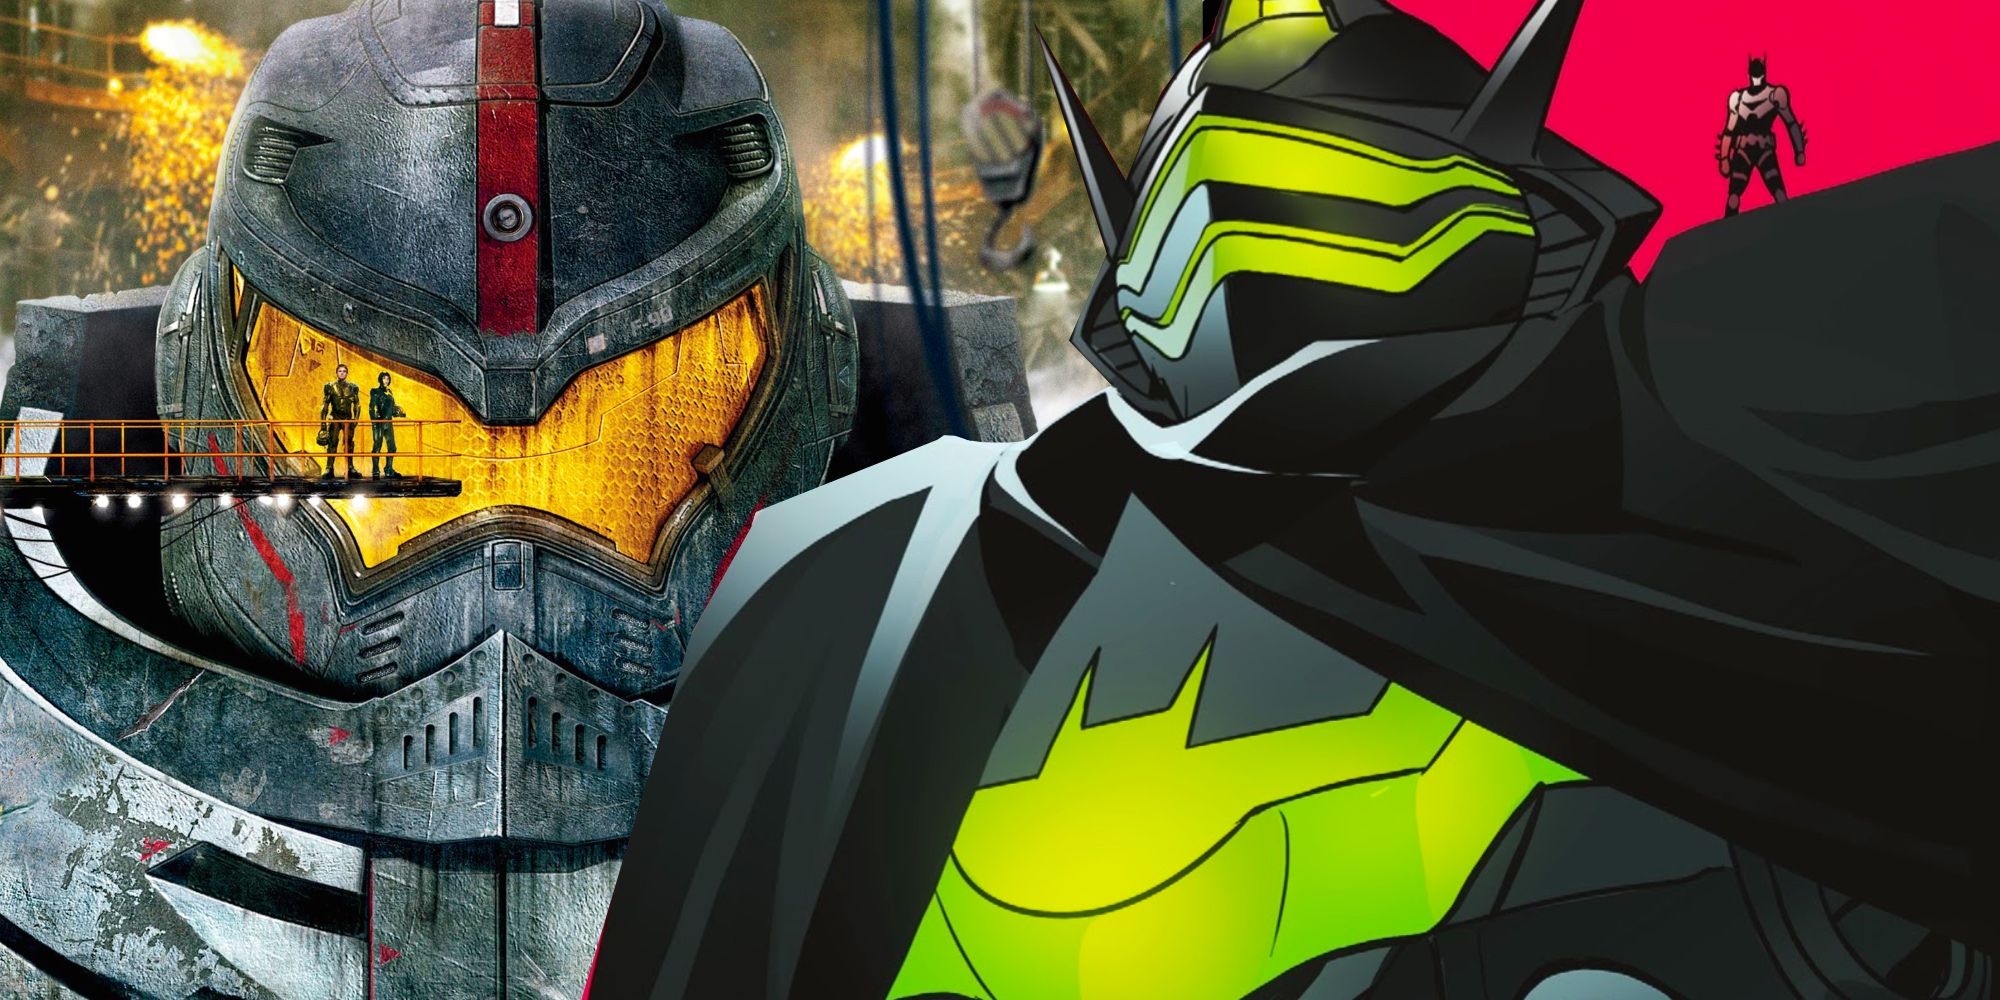 The Justice League Meets Pacific Rim in Epic New DC MECH Series Featured